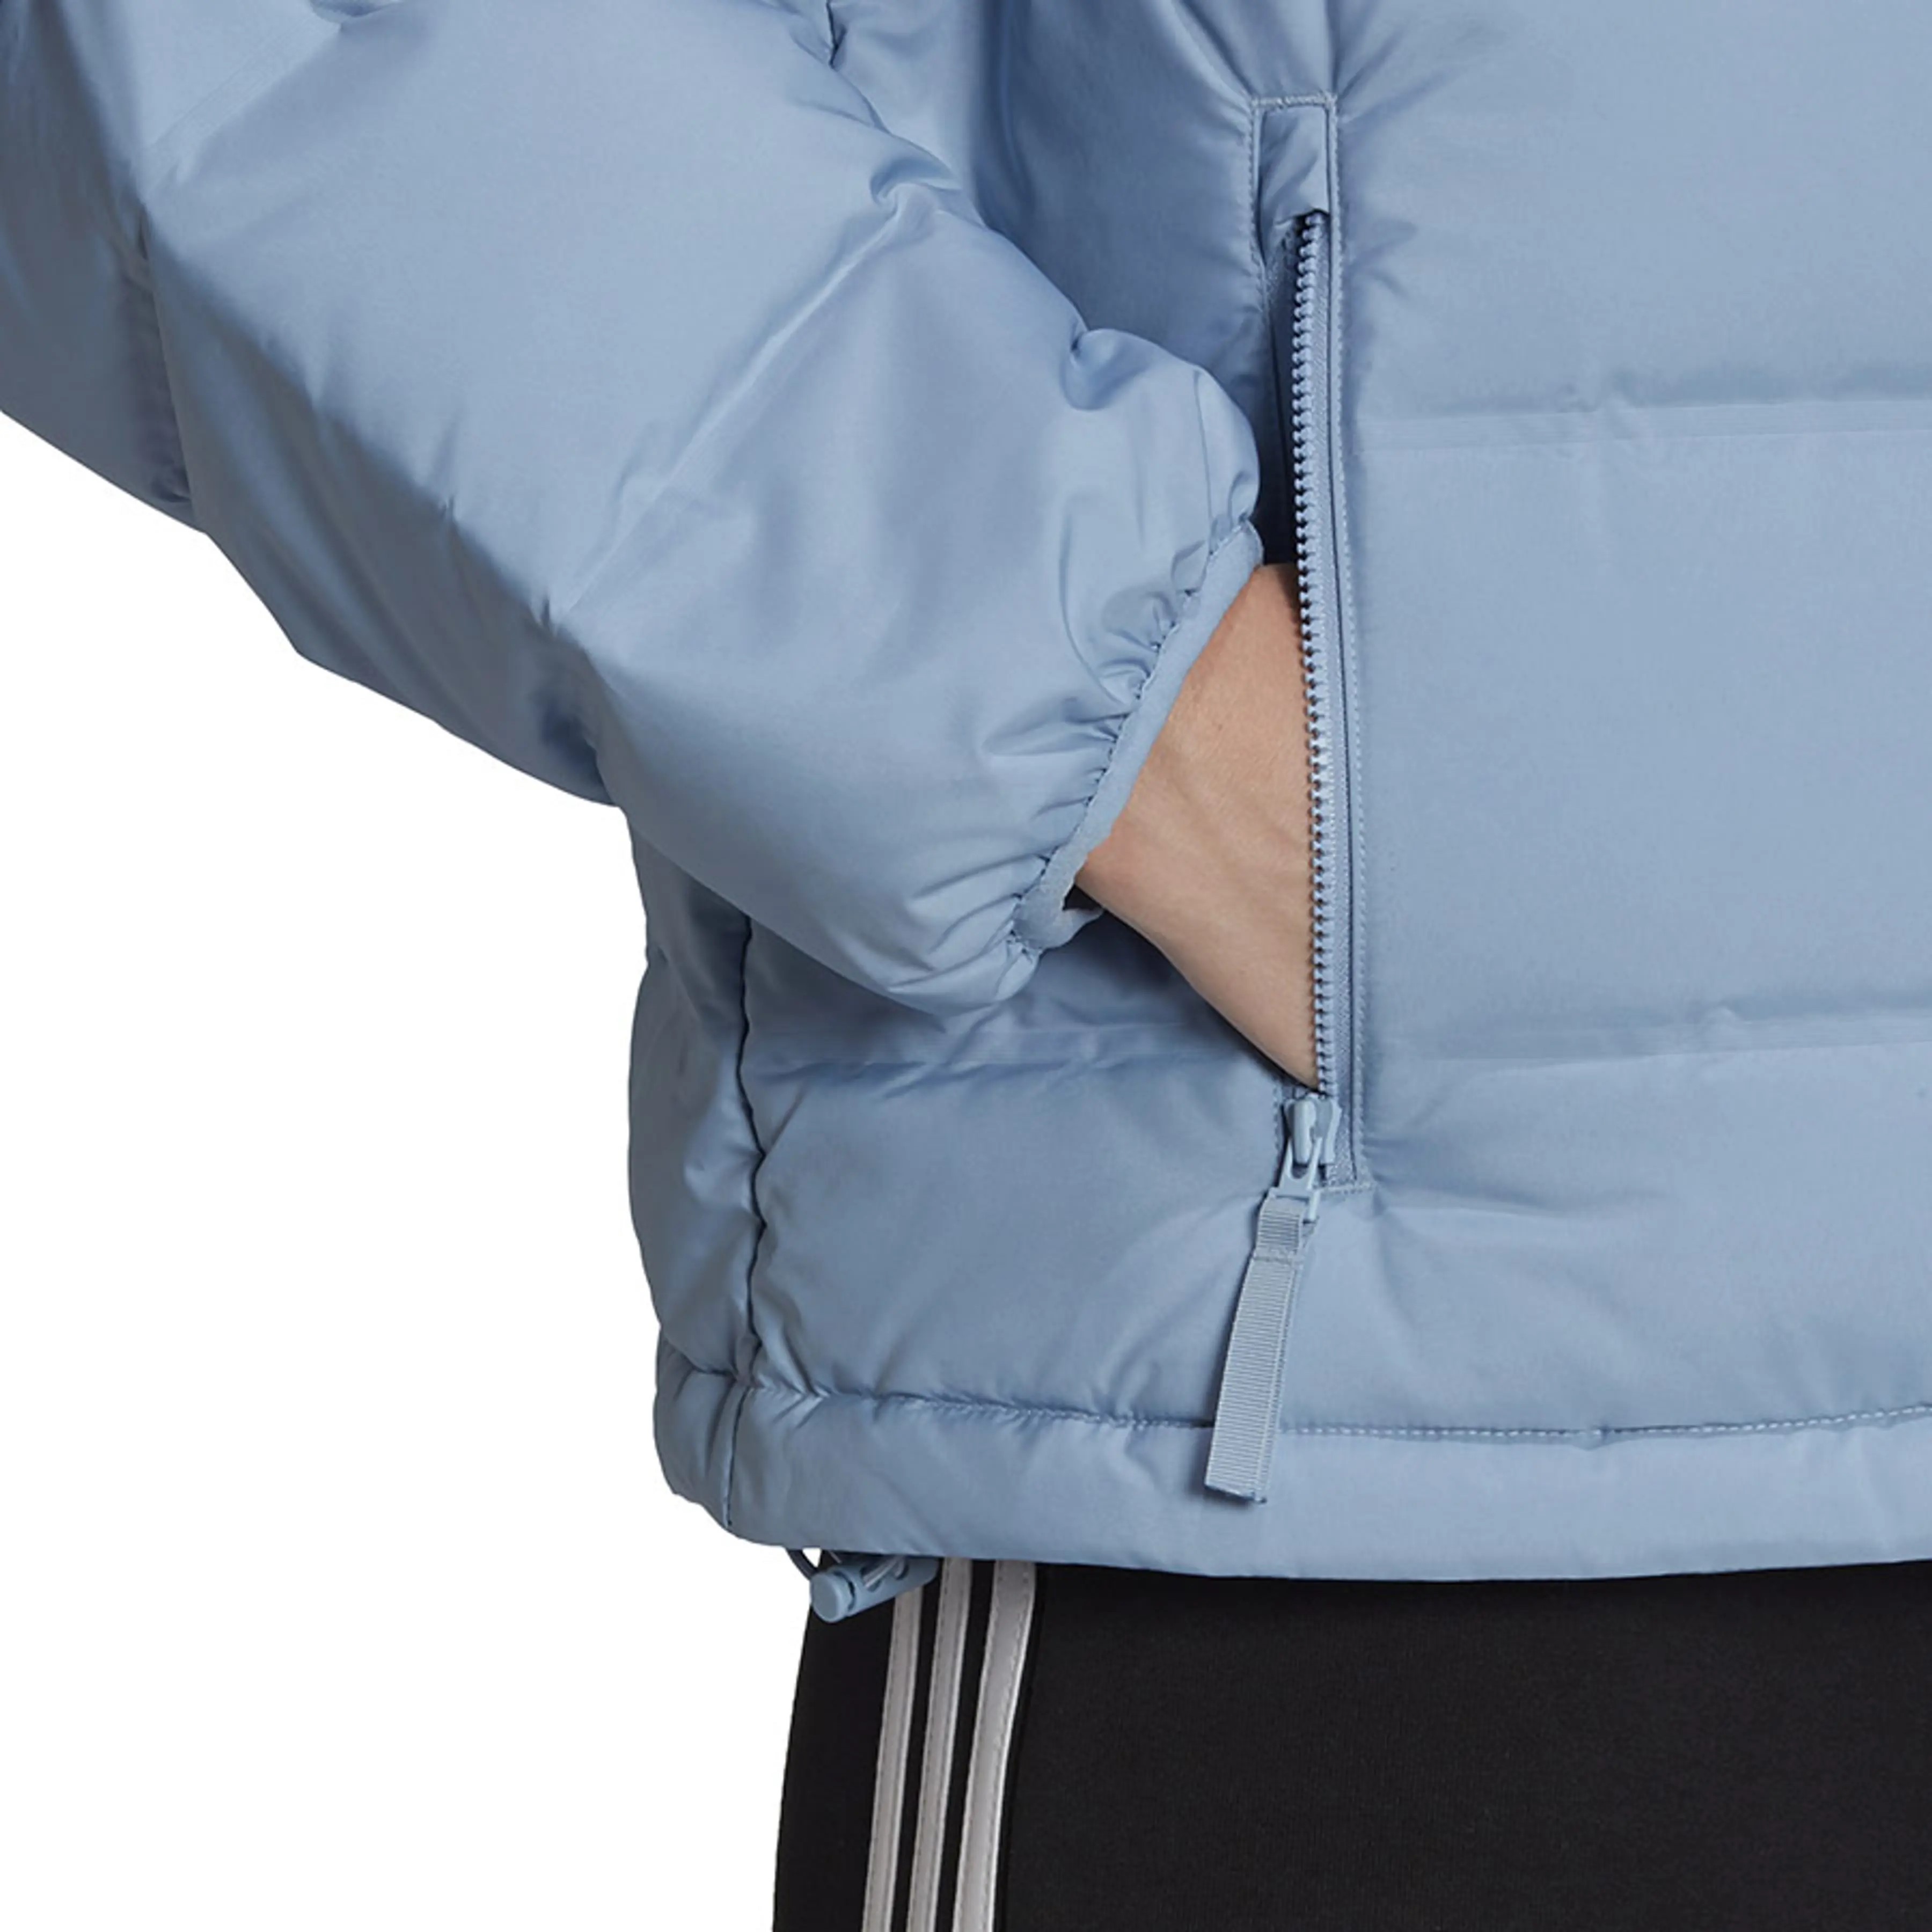 Adidas Women's Helionic Relaxed Fit Puffer Down Jacket, Ambient Sky | eBay